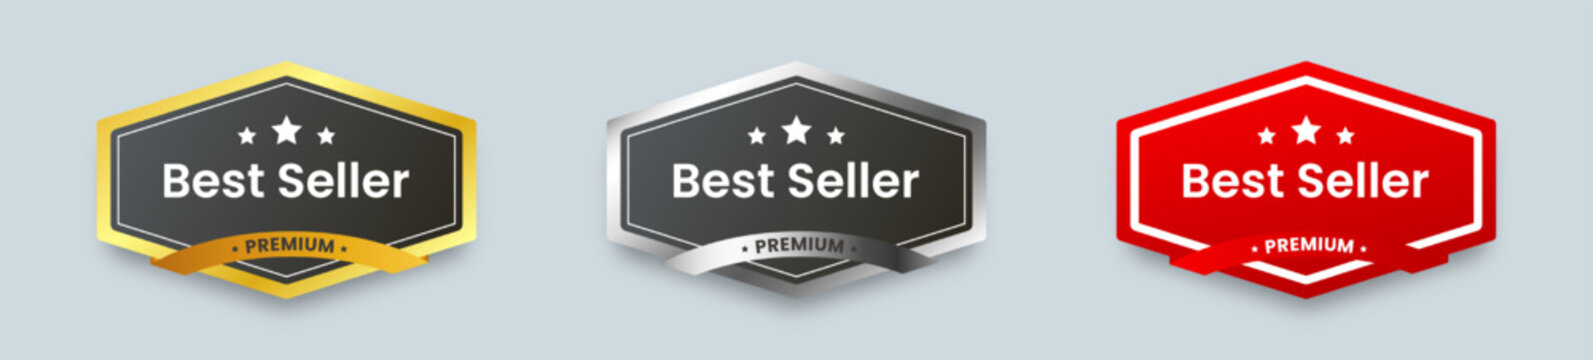 Best seller sticker label set with gold medal. Silver and red badge for product label.